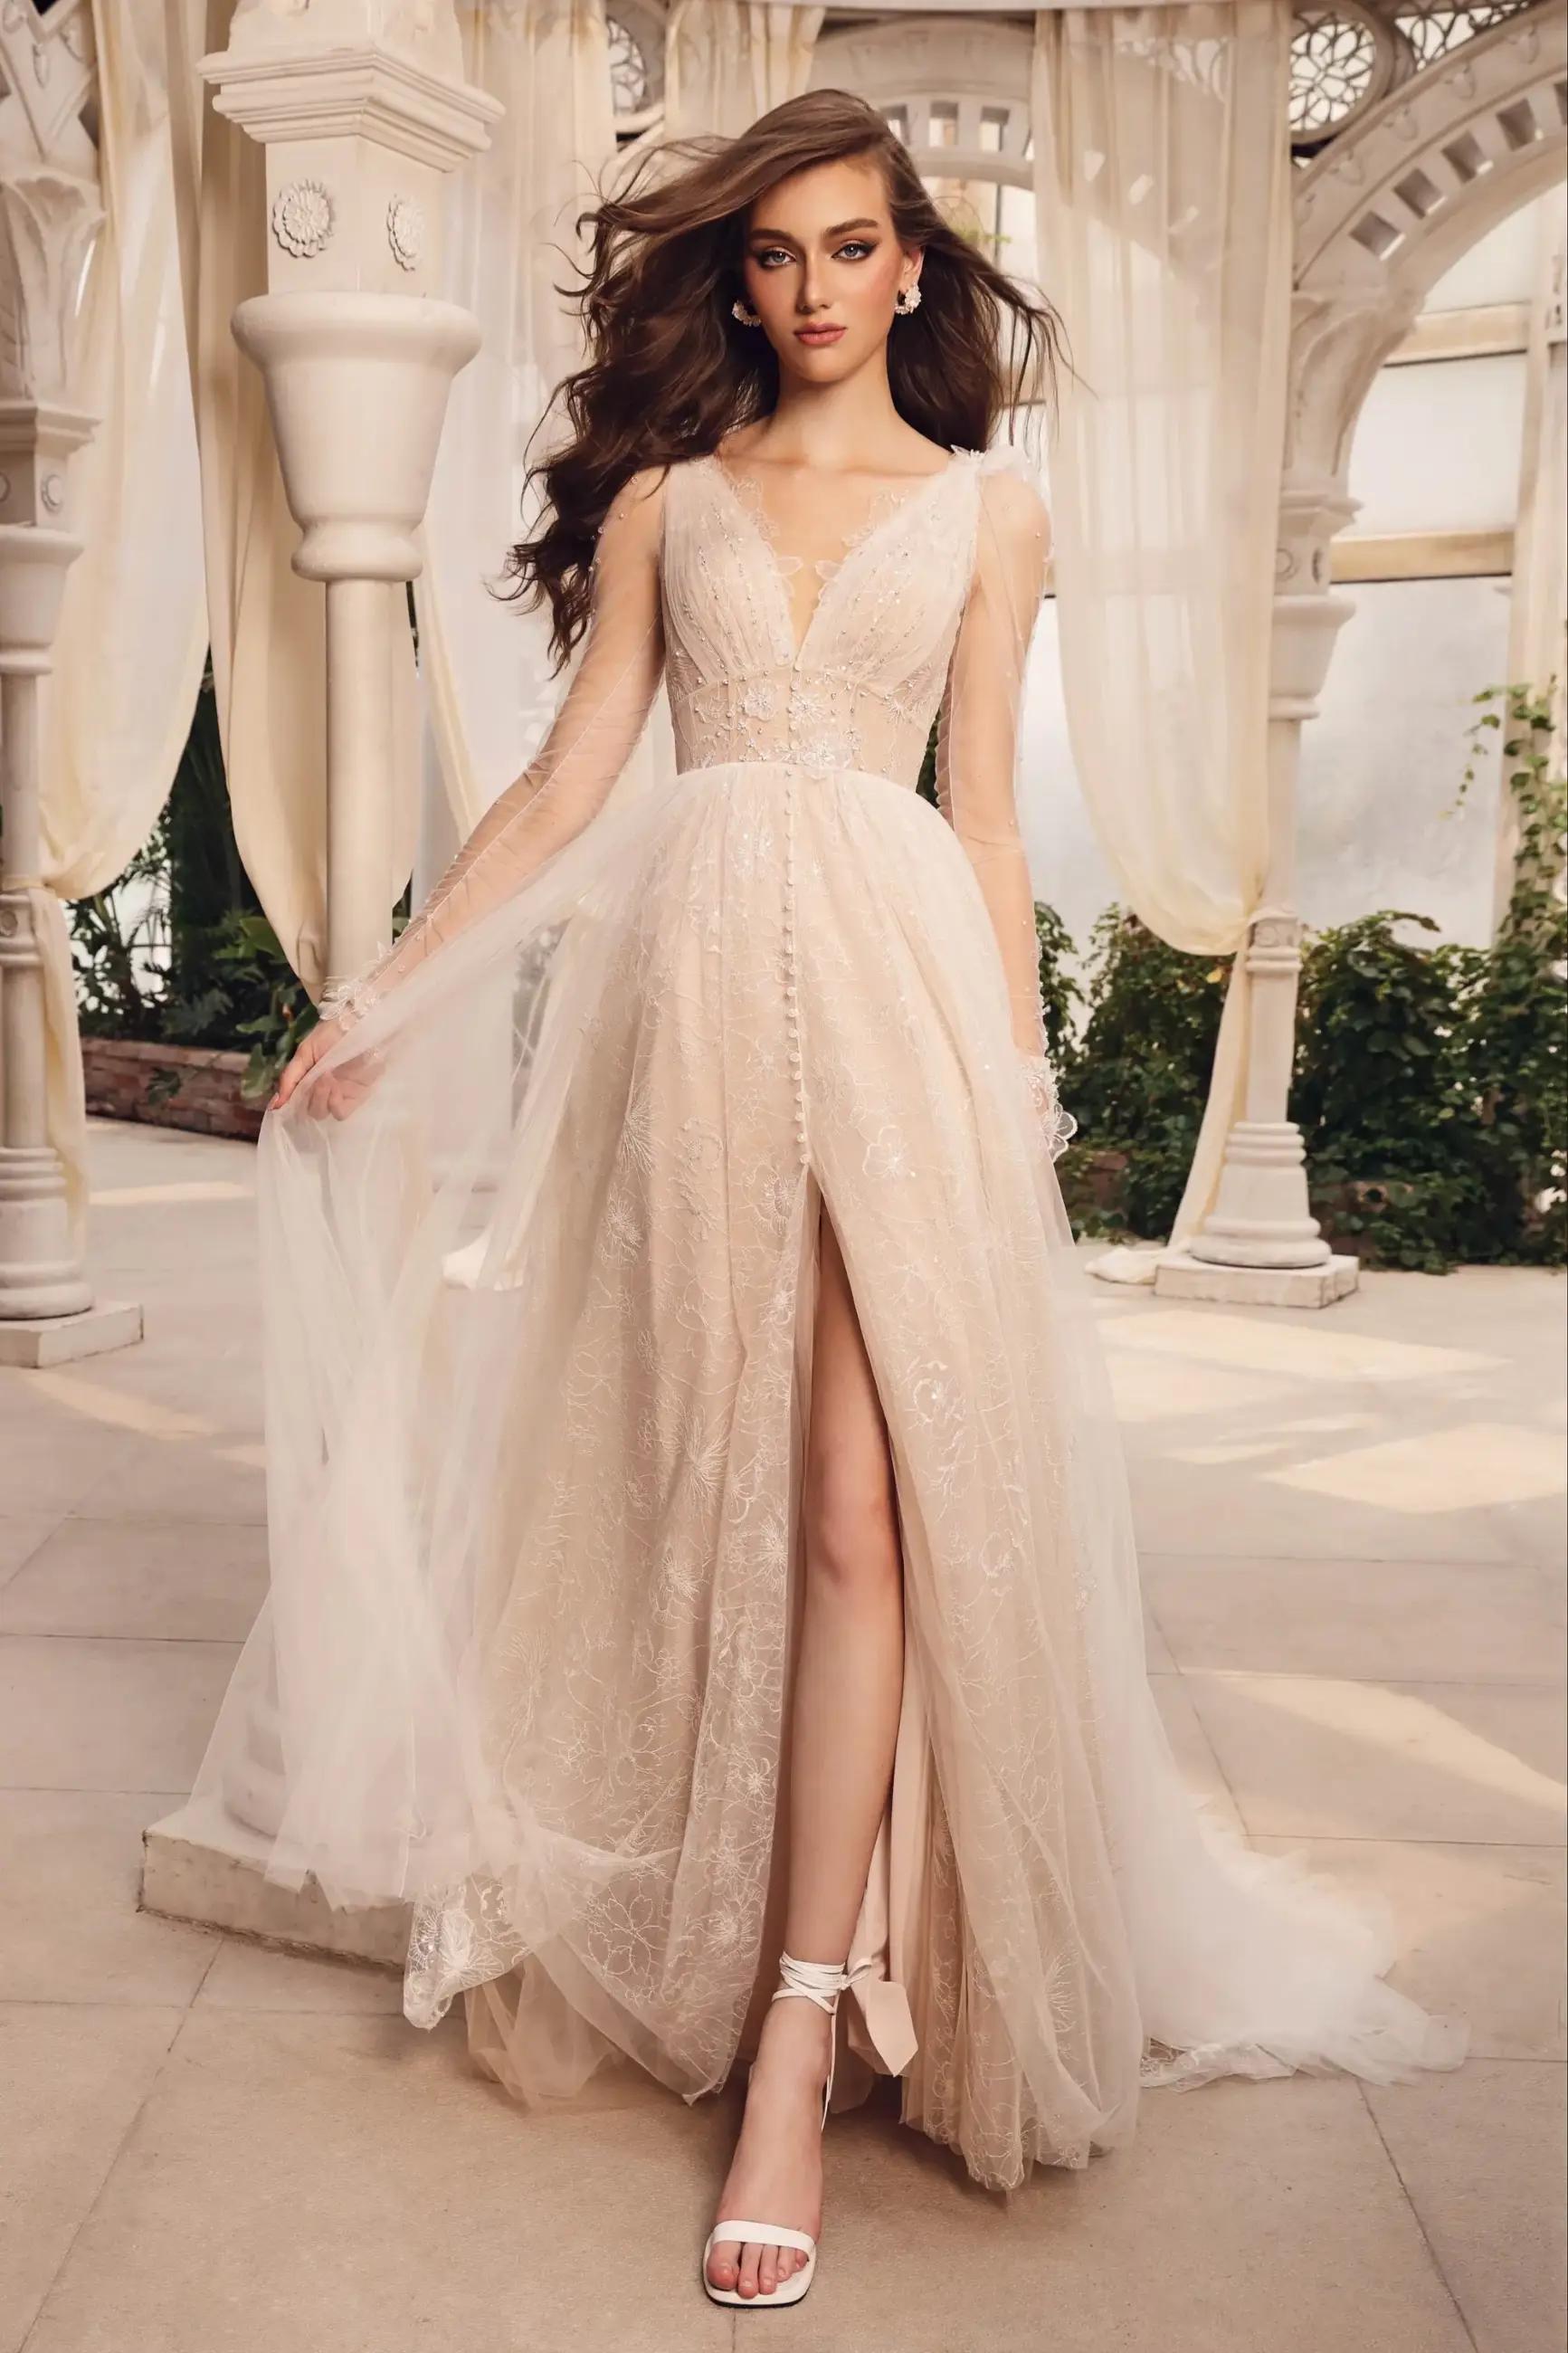 Hottest Wedding Gowns with Deep Slits Image